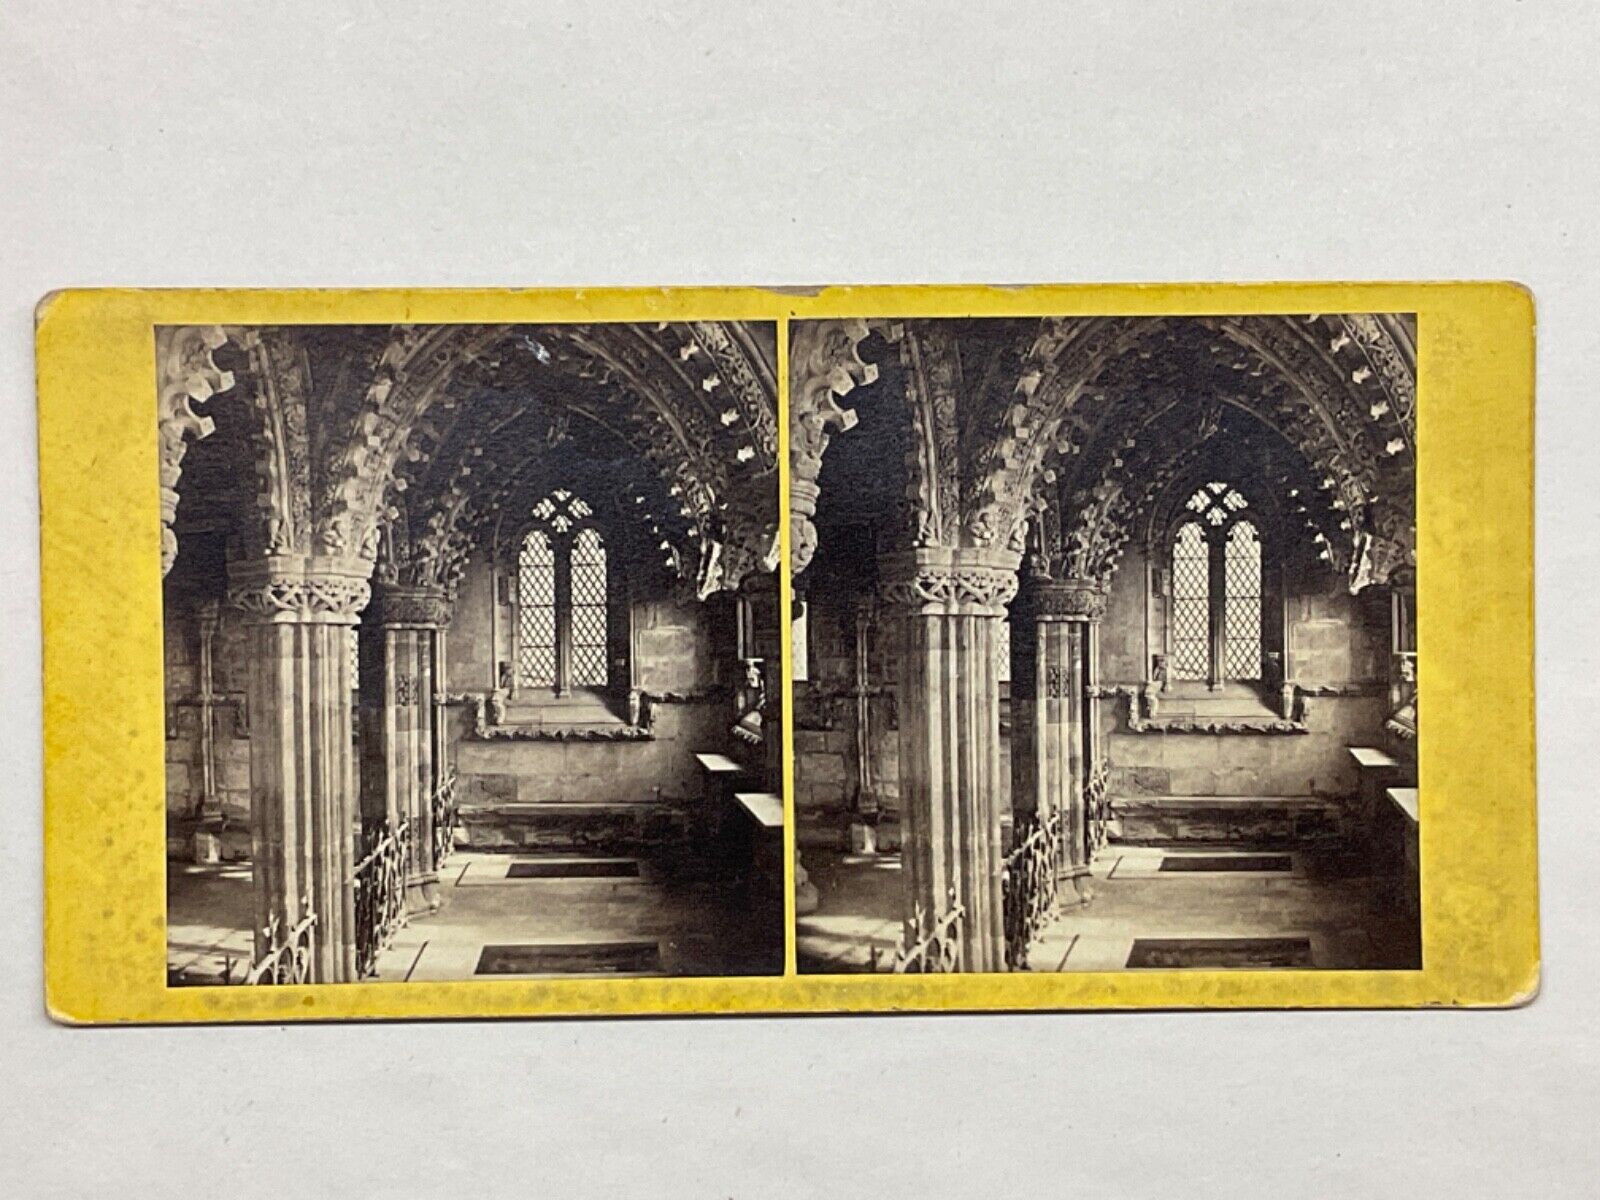 Interior of Roslyn Rosslyn Chapel Scotland Vintage Stereograph Stereoview Card